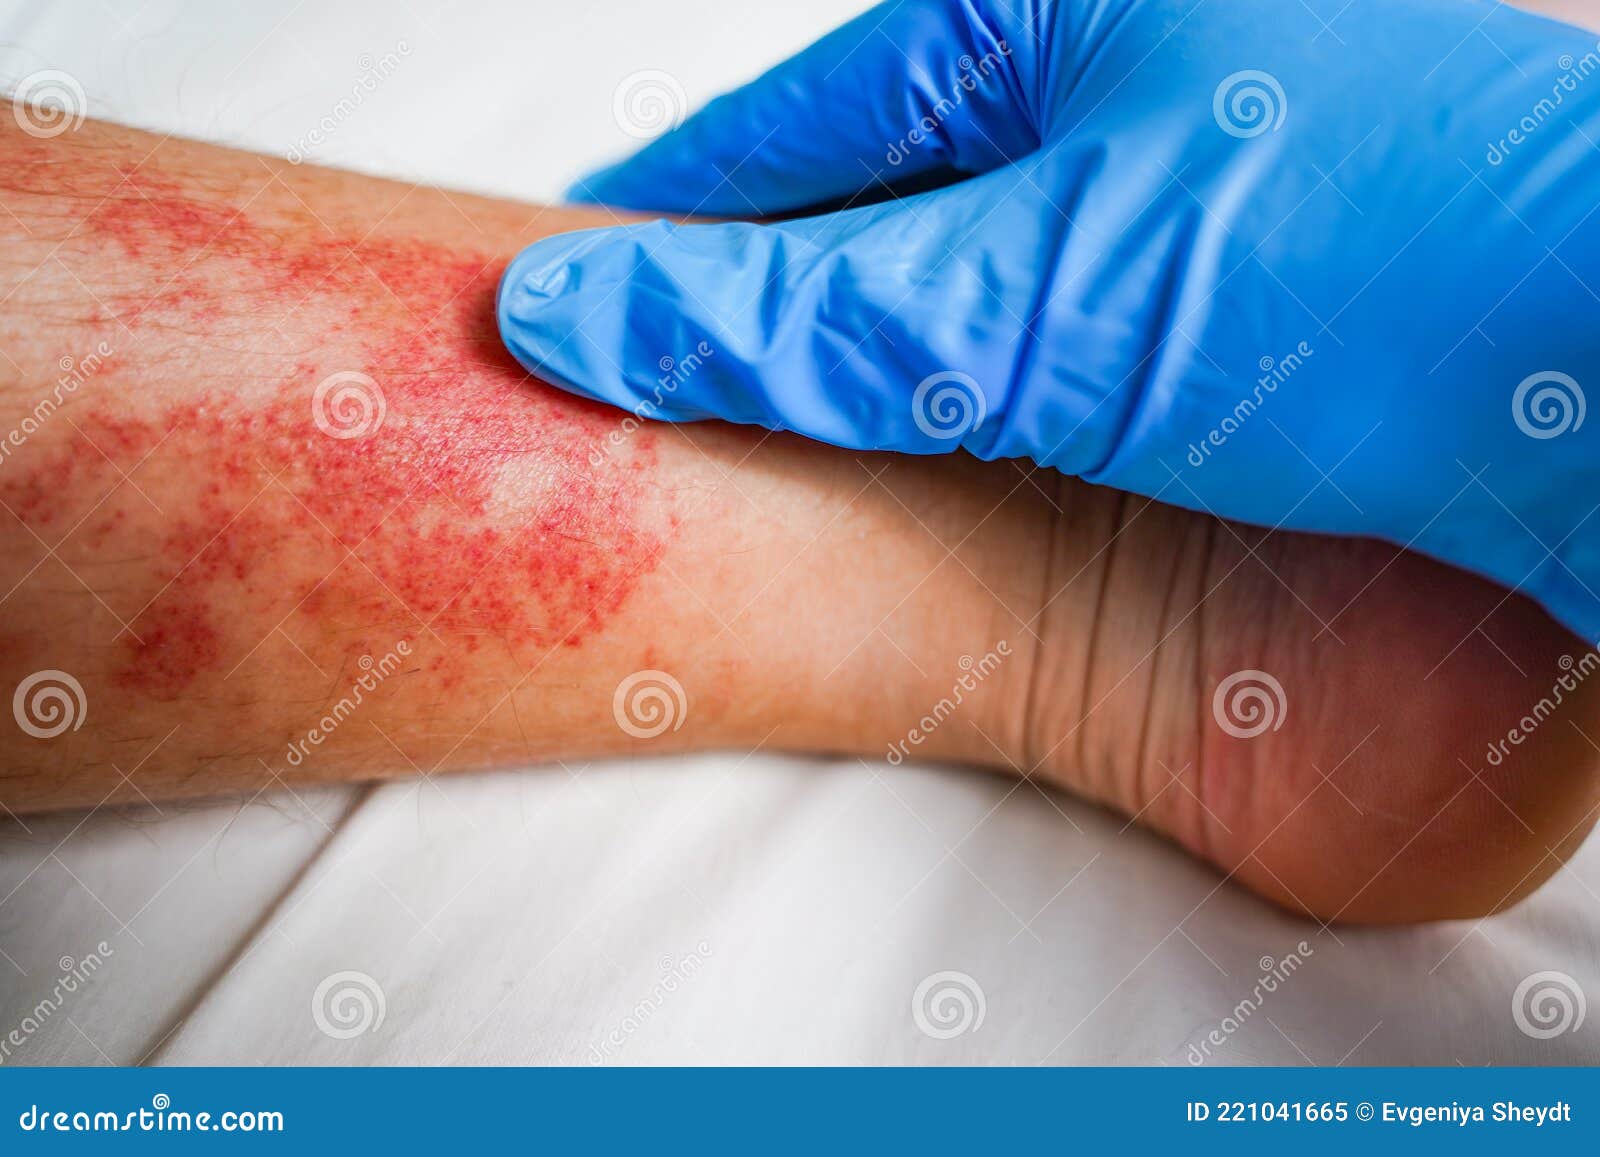 Disease Of The Skin On The Legs Itchy Red Rashes And Spots Stock Image